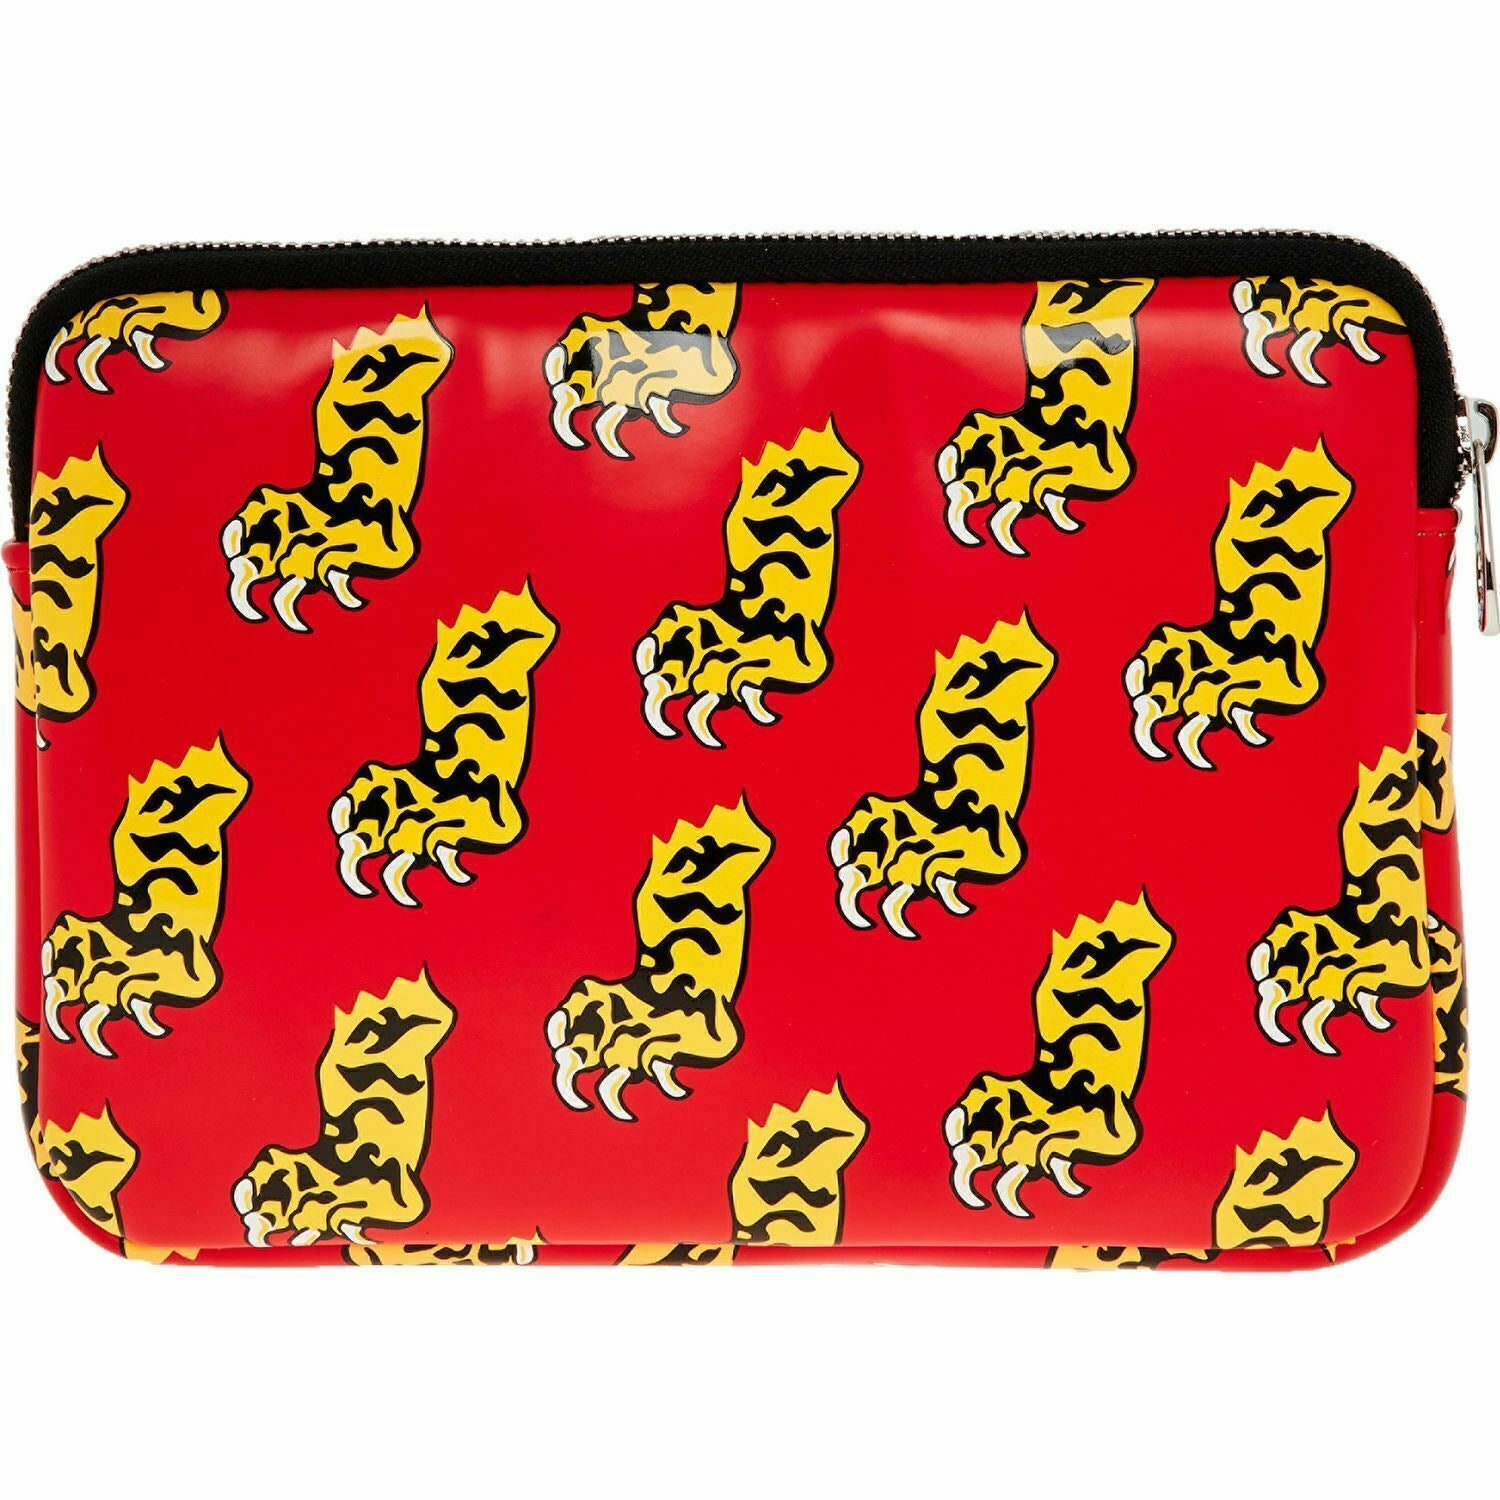 Authentic Marc By MARC JACOBS 9" Tablet Case, Black/Red/Yellow Tiger Paws